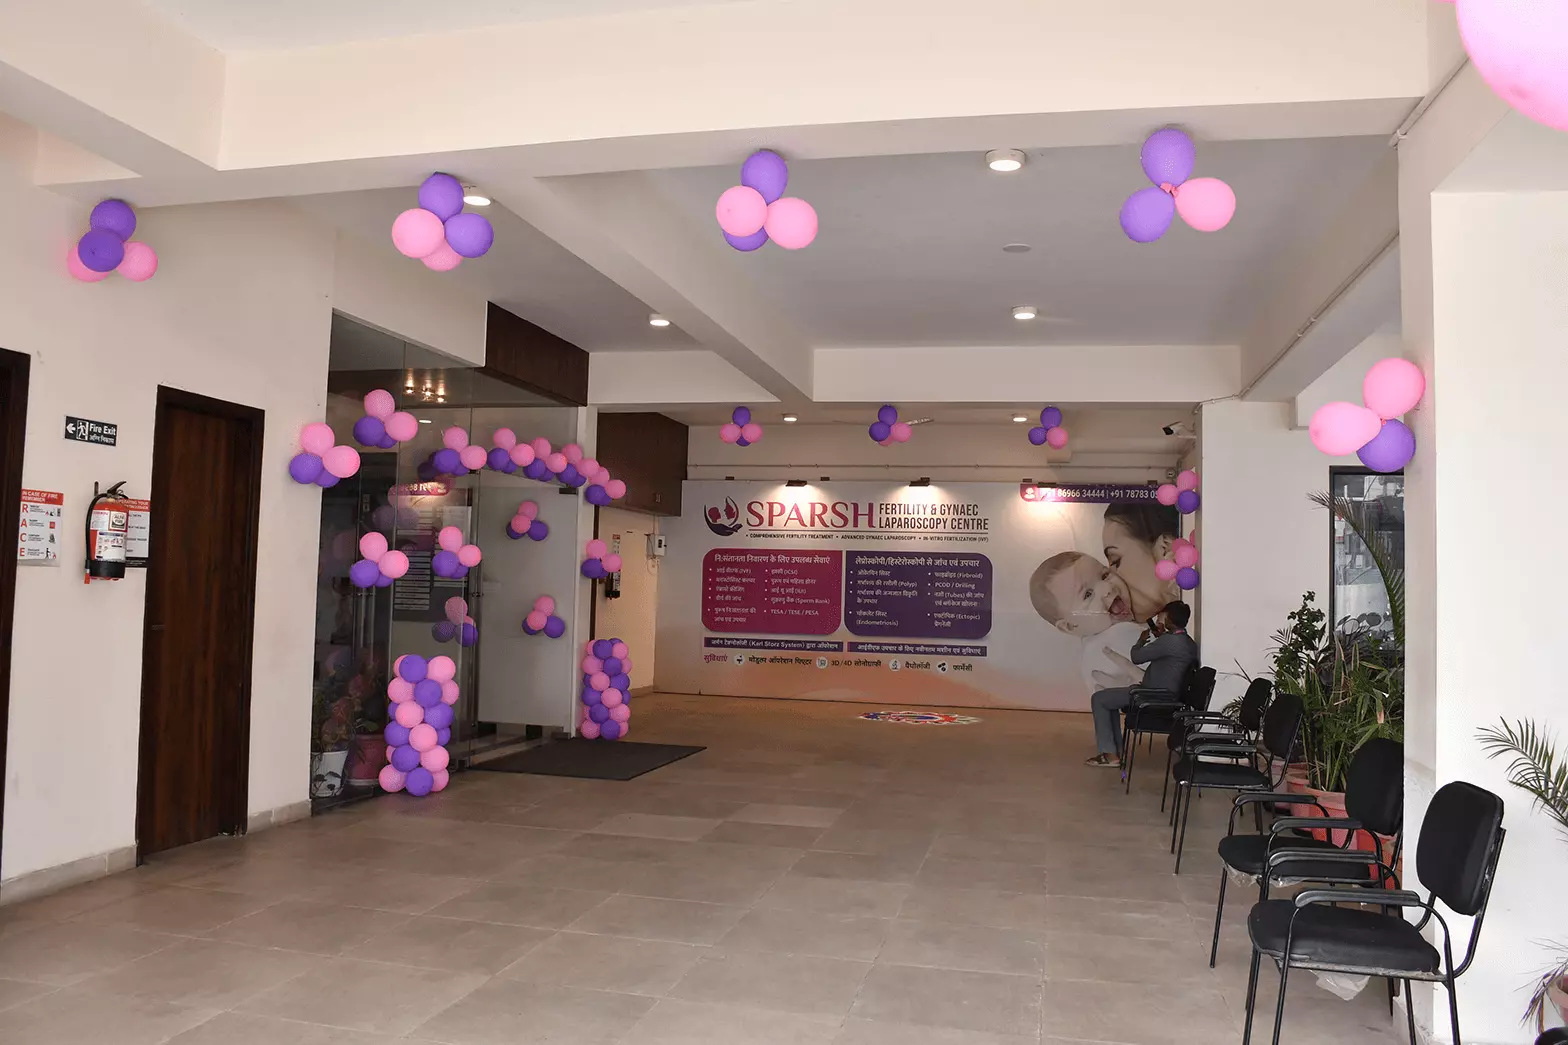 Sparsh ivf clinic 3rd anniversary